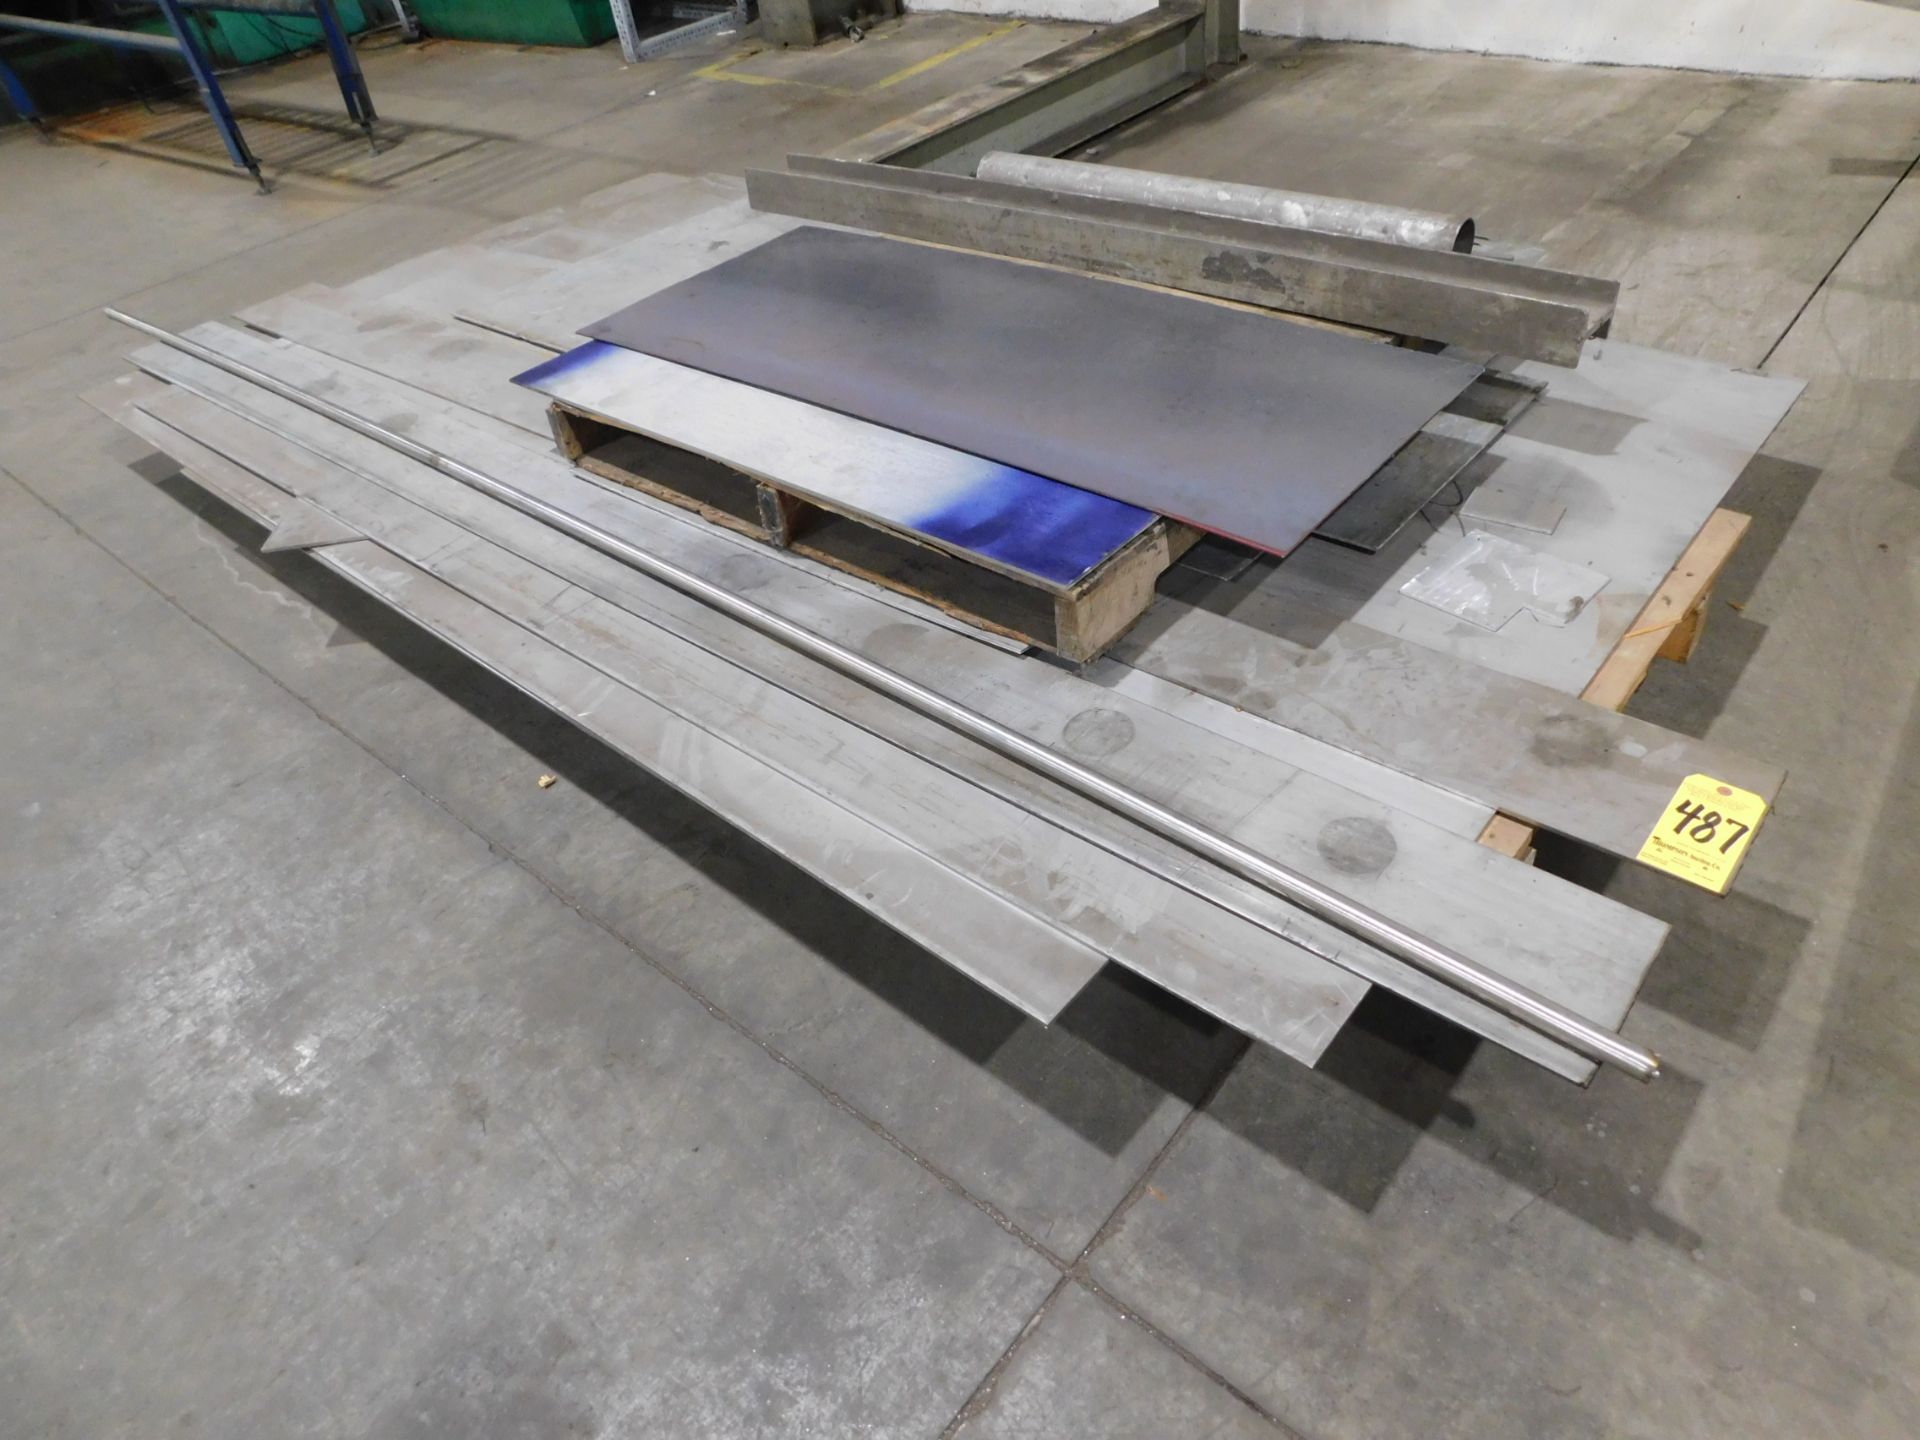 Misc. Stainless Steel Sheets including (2) 60" X 102" X 1/4" and Several Additional Pieces